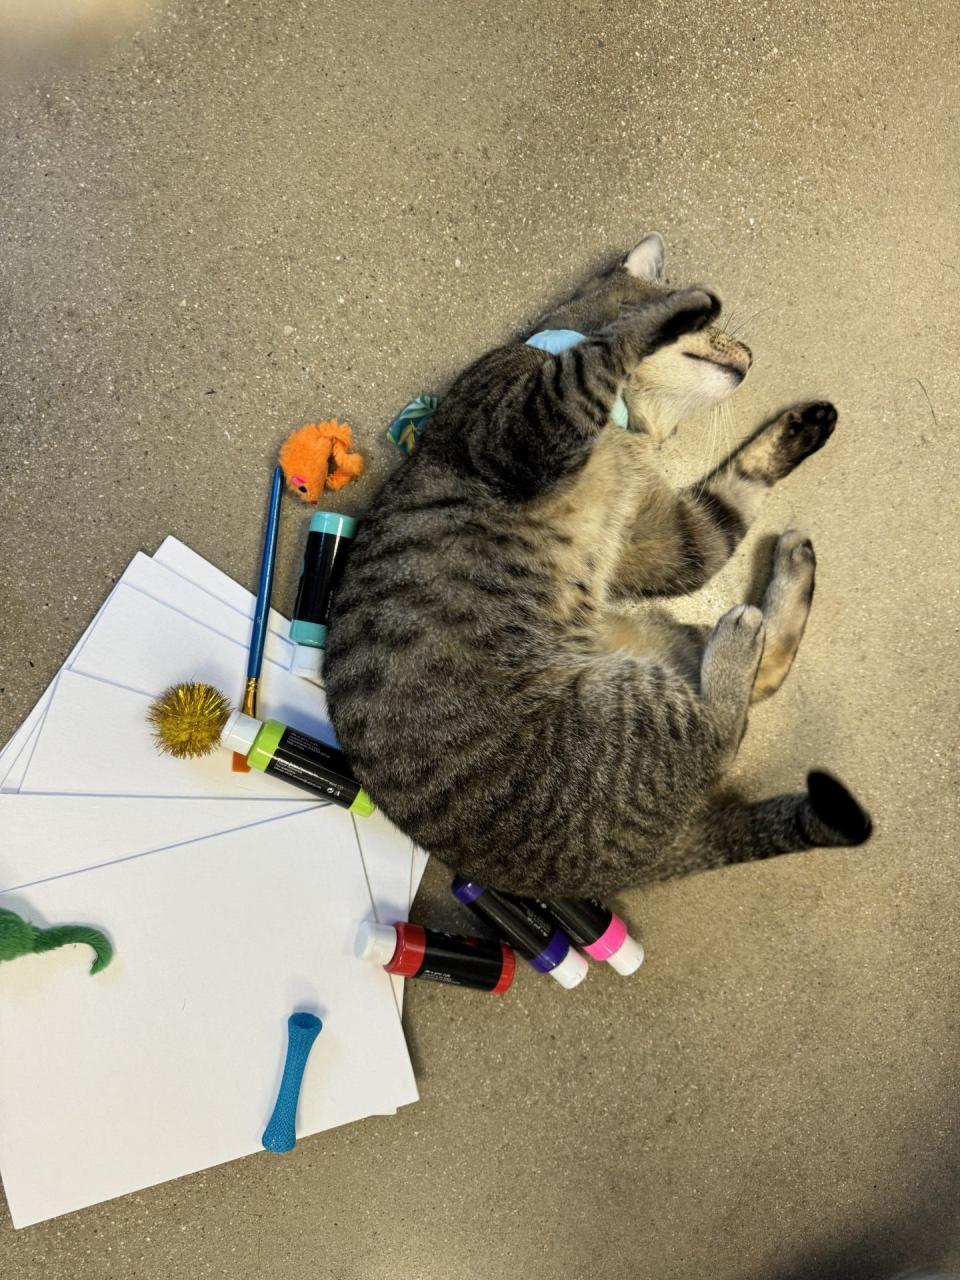 The artist in repose: Ralph the rescue cat prepares to create his masterpiece, a painting created by a feline. Art created by cats is one of the events of Friday's Give Local York fund-raiser at the York County SPCA.